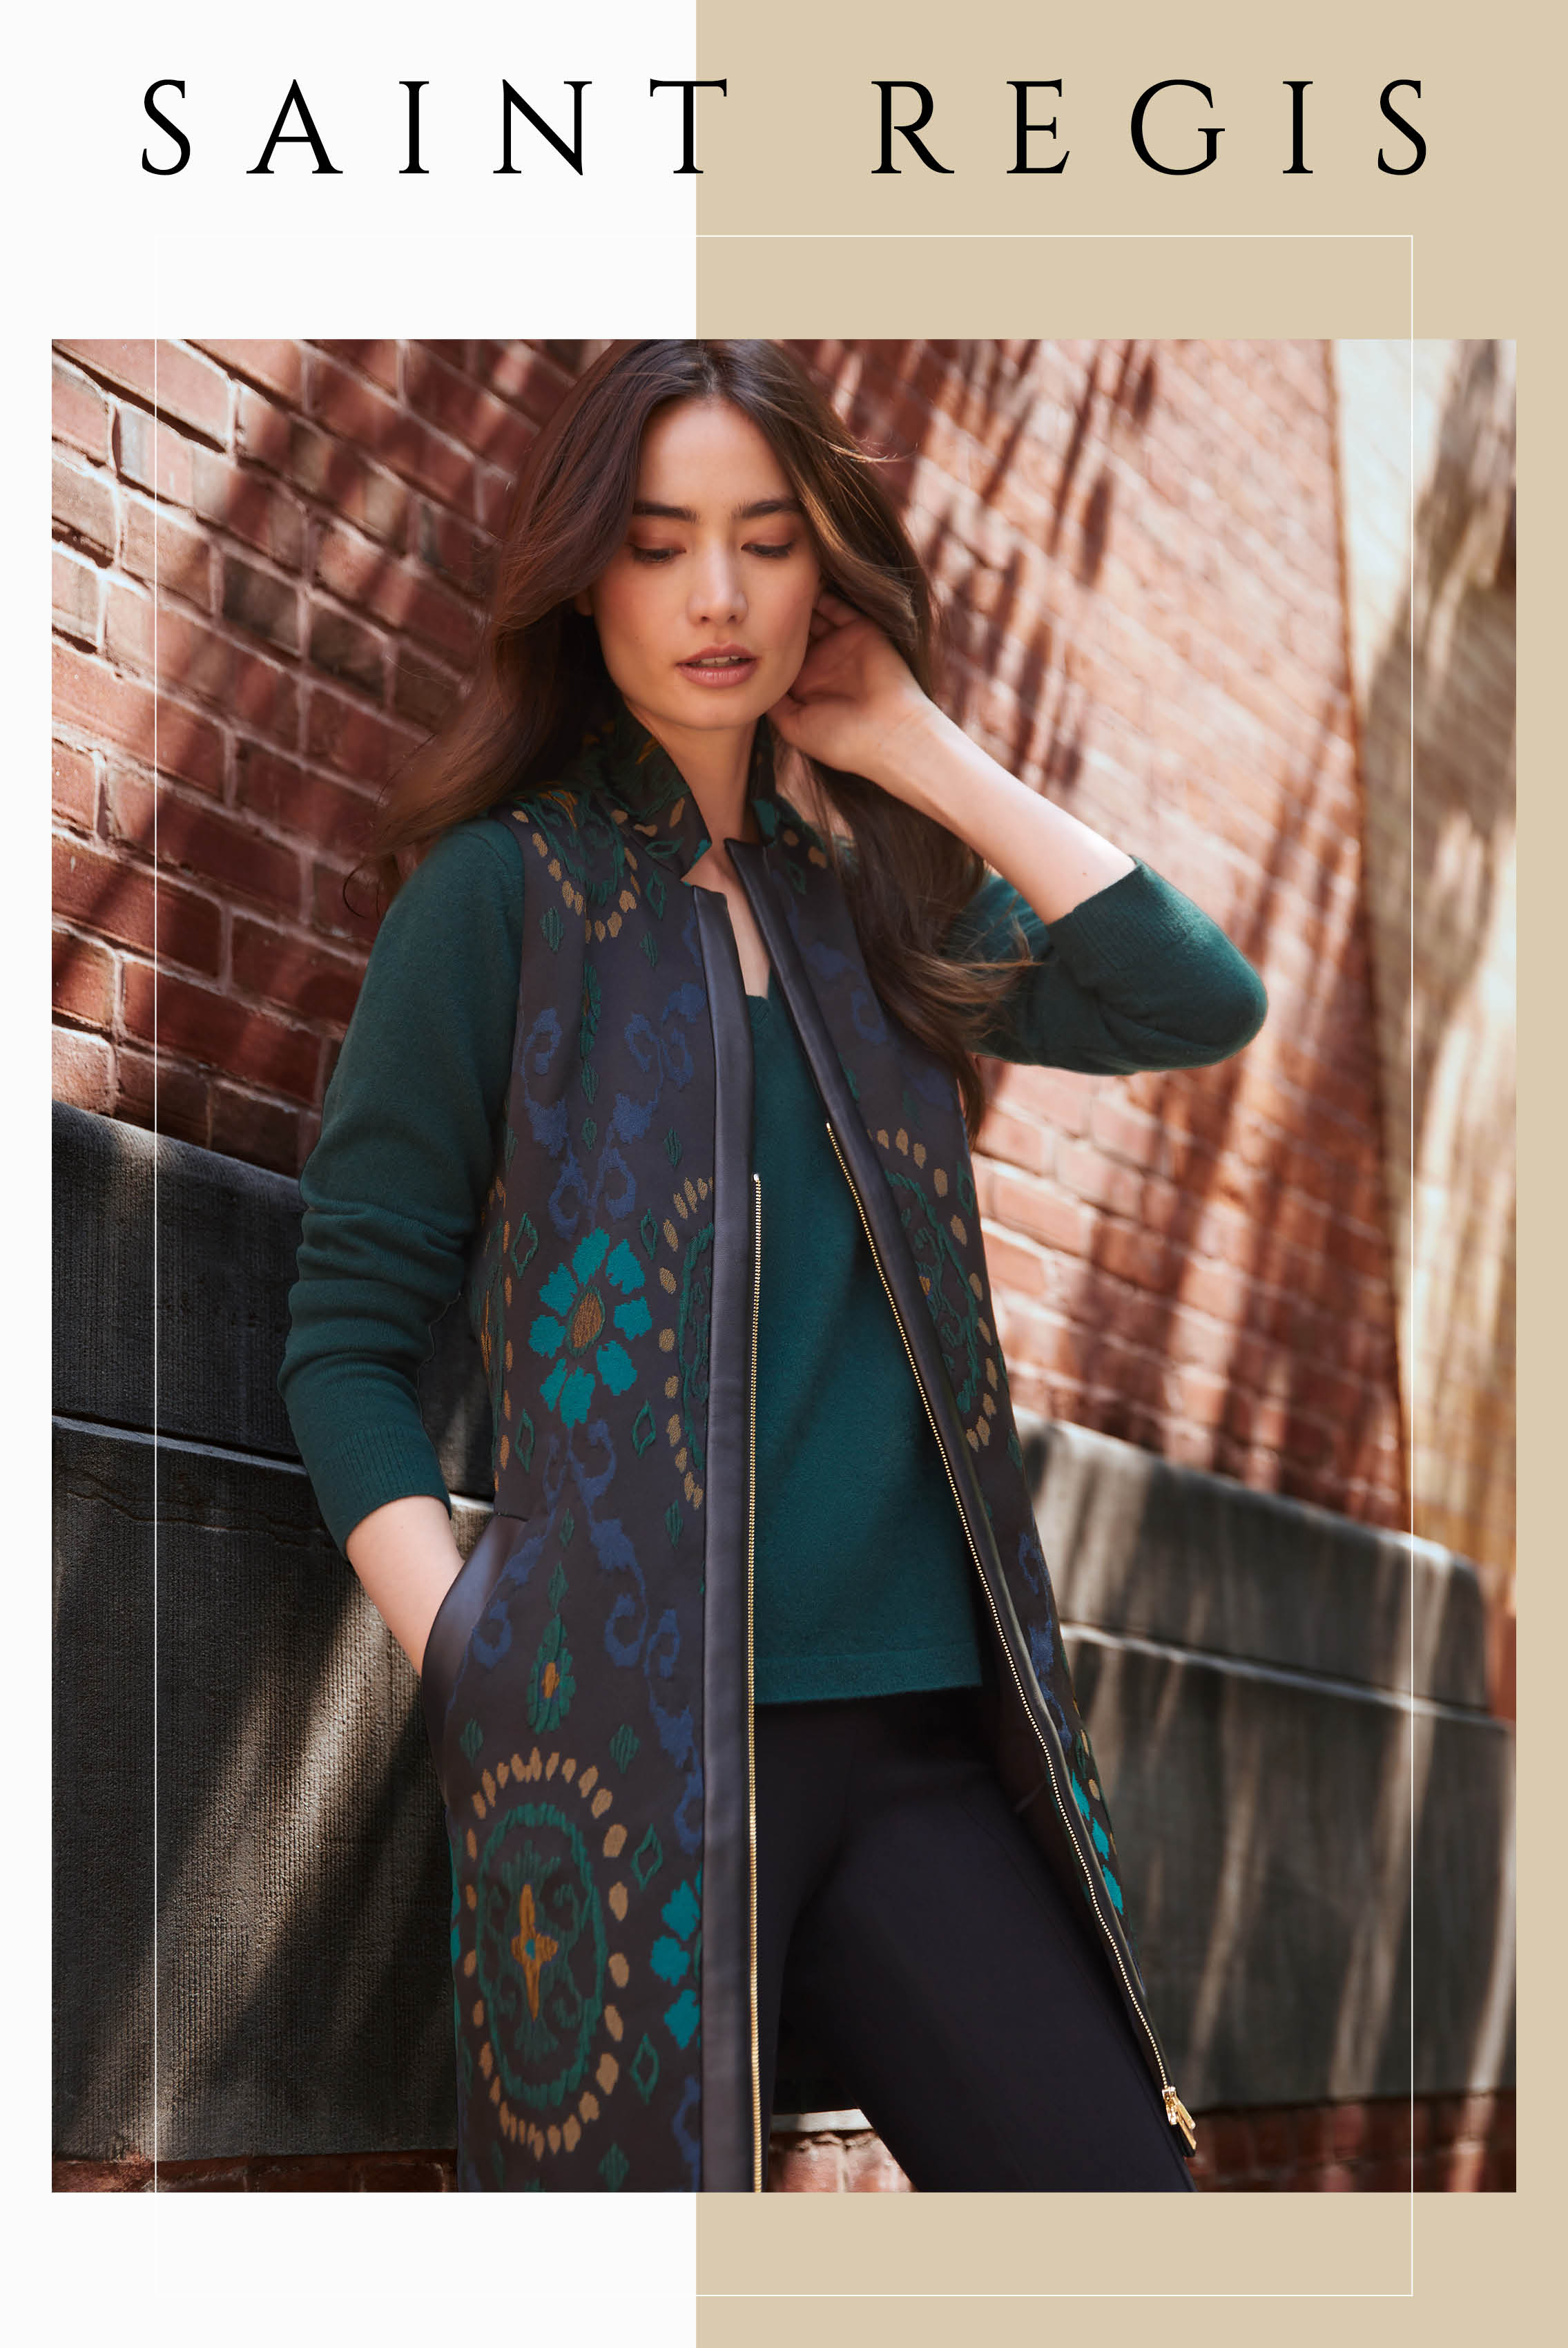 This posh Italian jacquard vest has an abstract floral pattern that resembles a priceless Turkish rug. The spruce green in the pattern is echoed by the feminine, all-cashmere V-neck sweater.